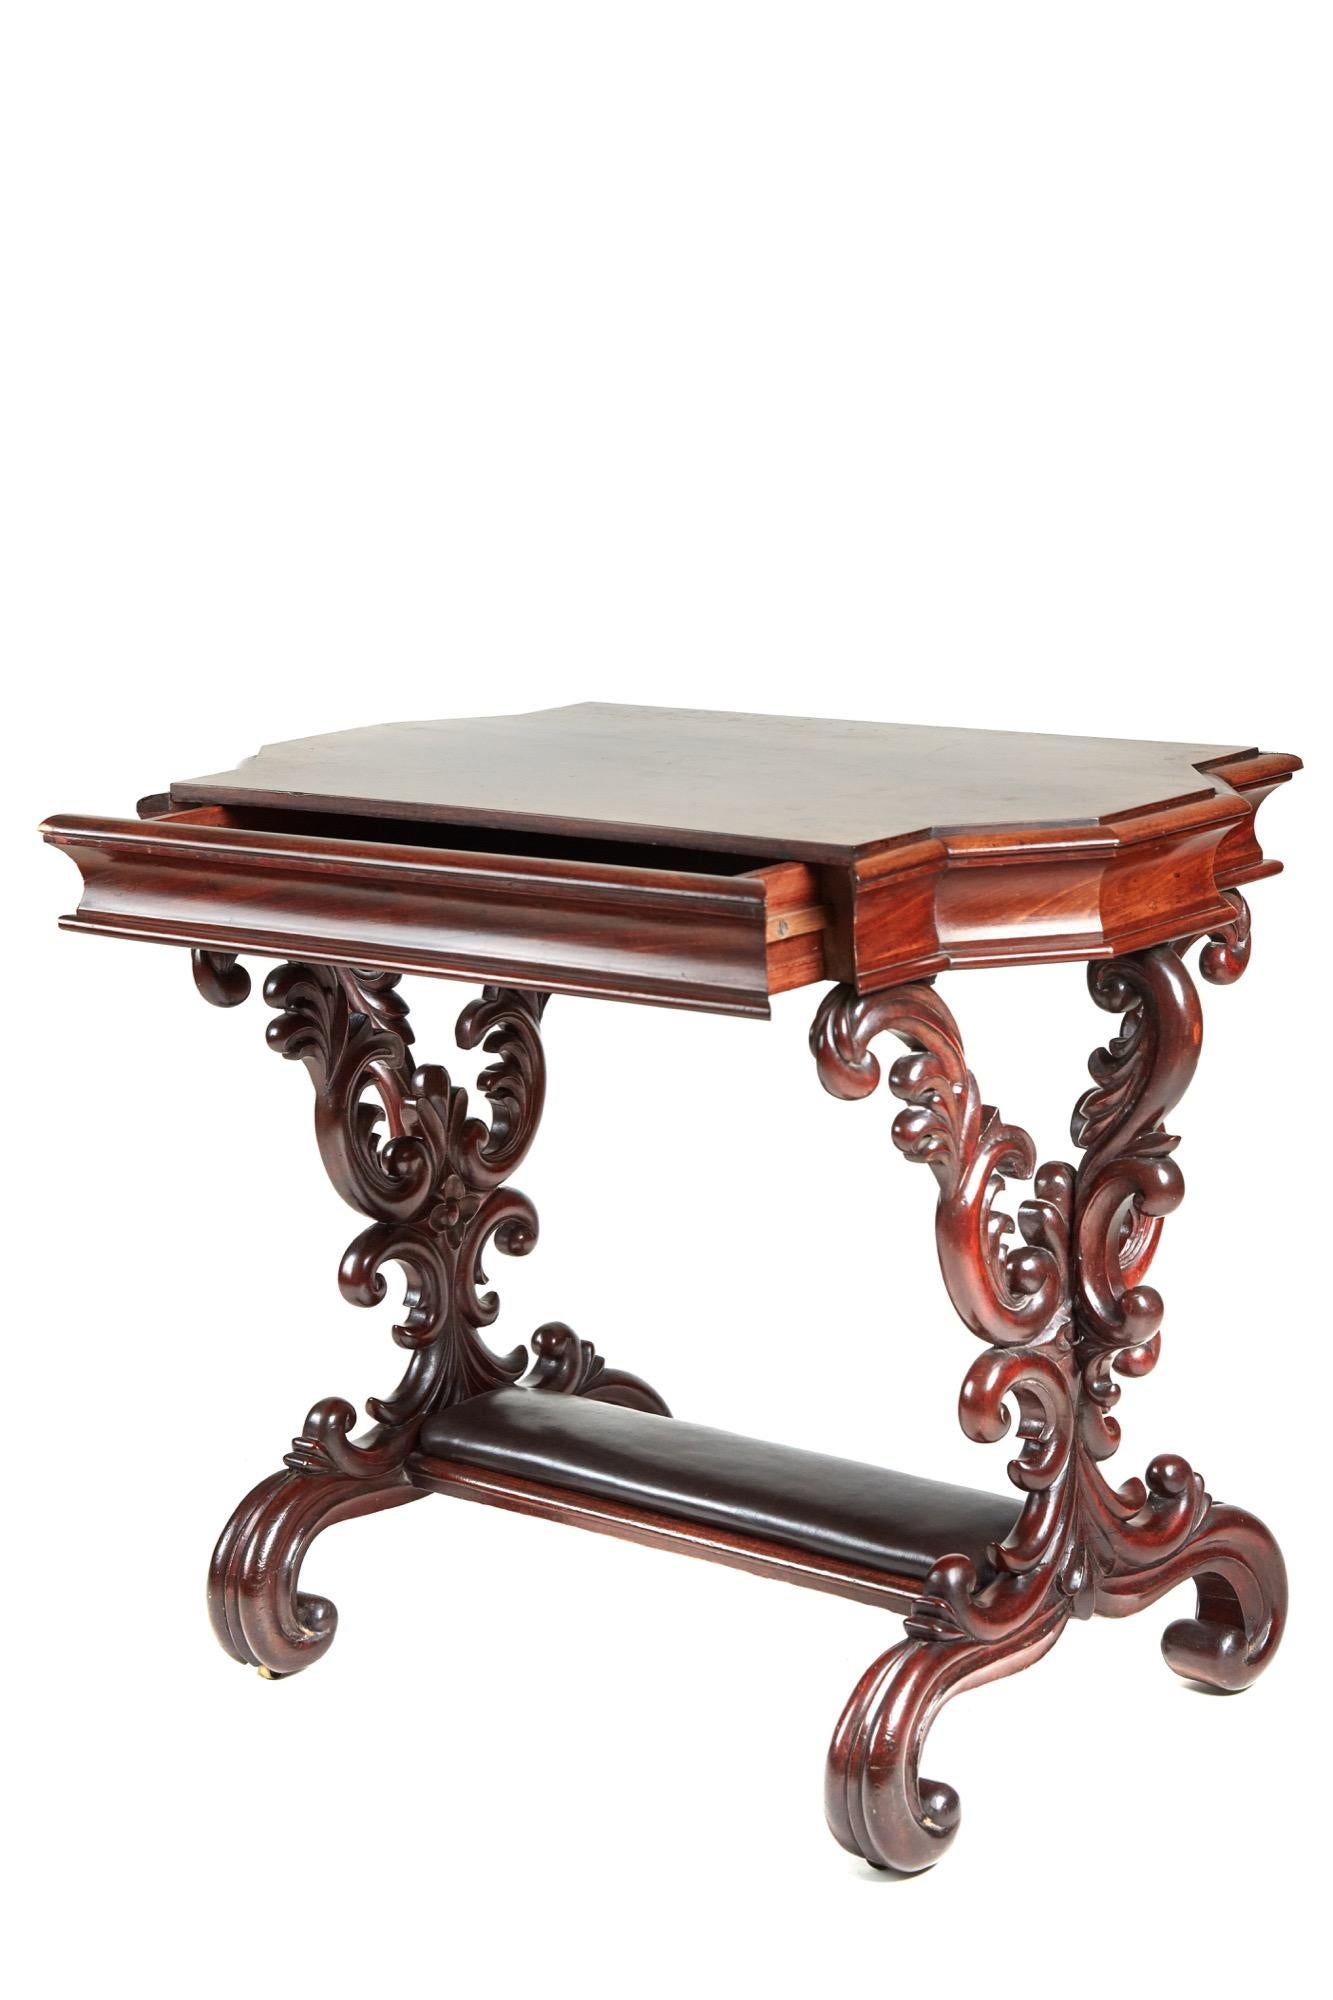 This is an outstanding quality 19th century antique carved mahogany freestanding centre table with a very attractive shaped top with fitted drawer to the shaped frieze. It has fantastic elaborately carved scroll supports and stands on elegant carved